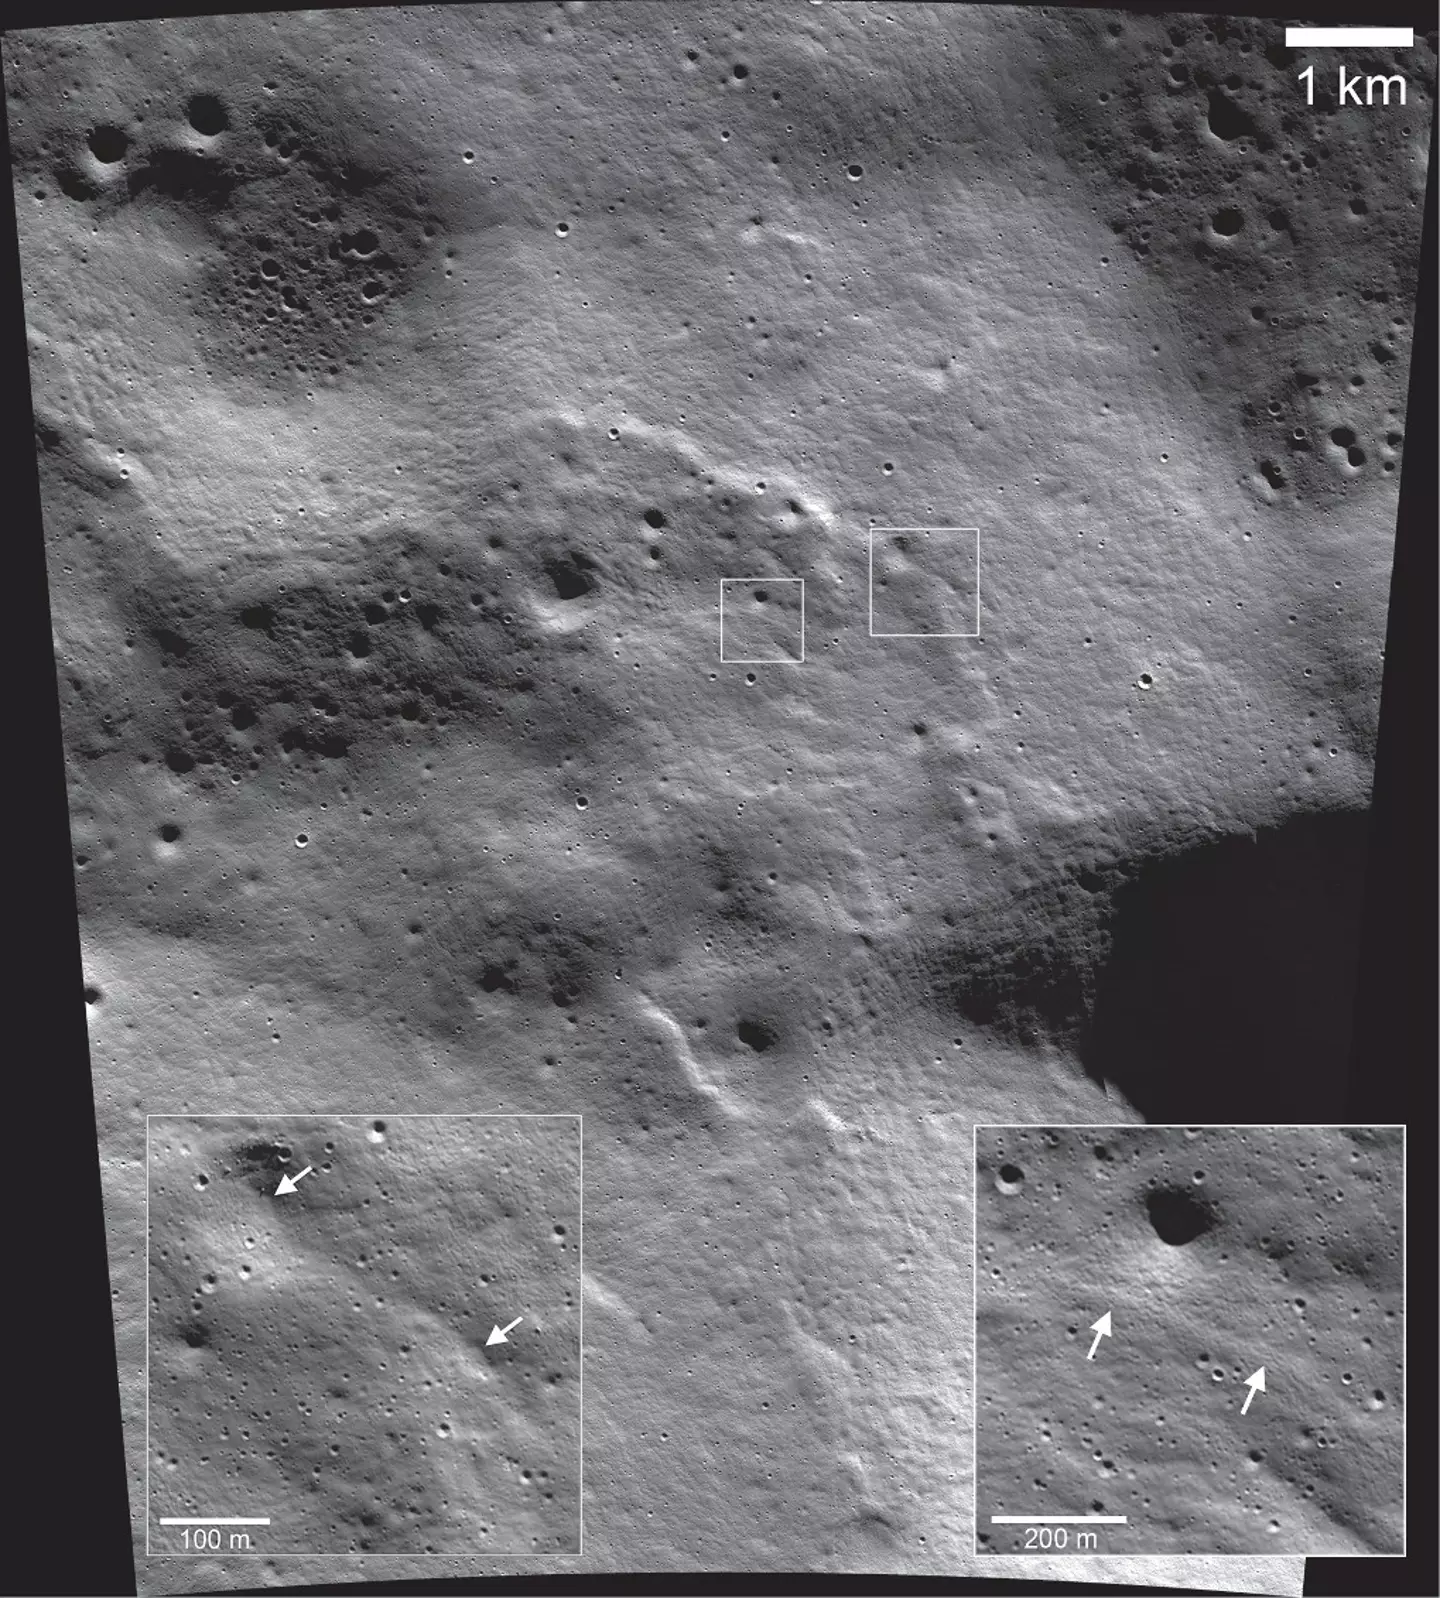 Some areas of the moon are more susceptible to landslides.